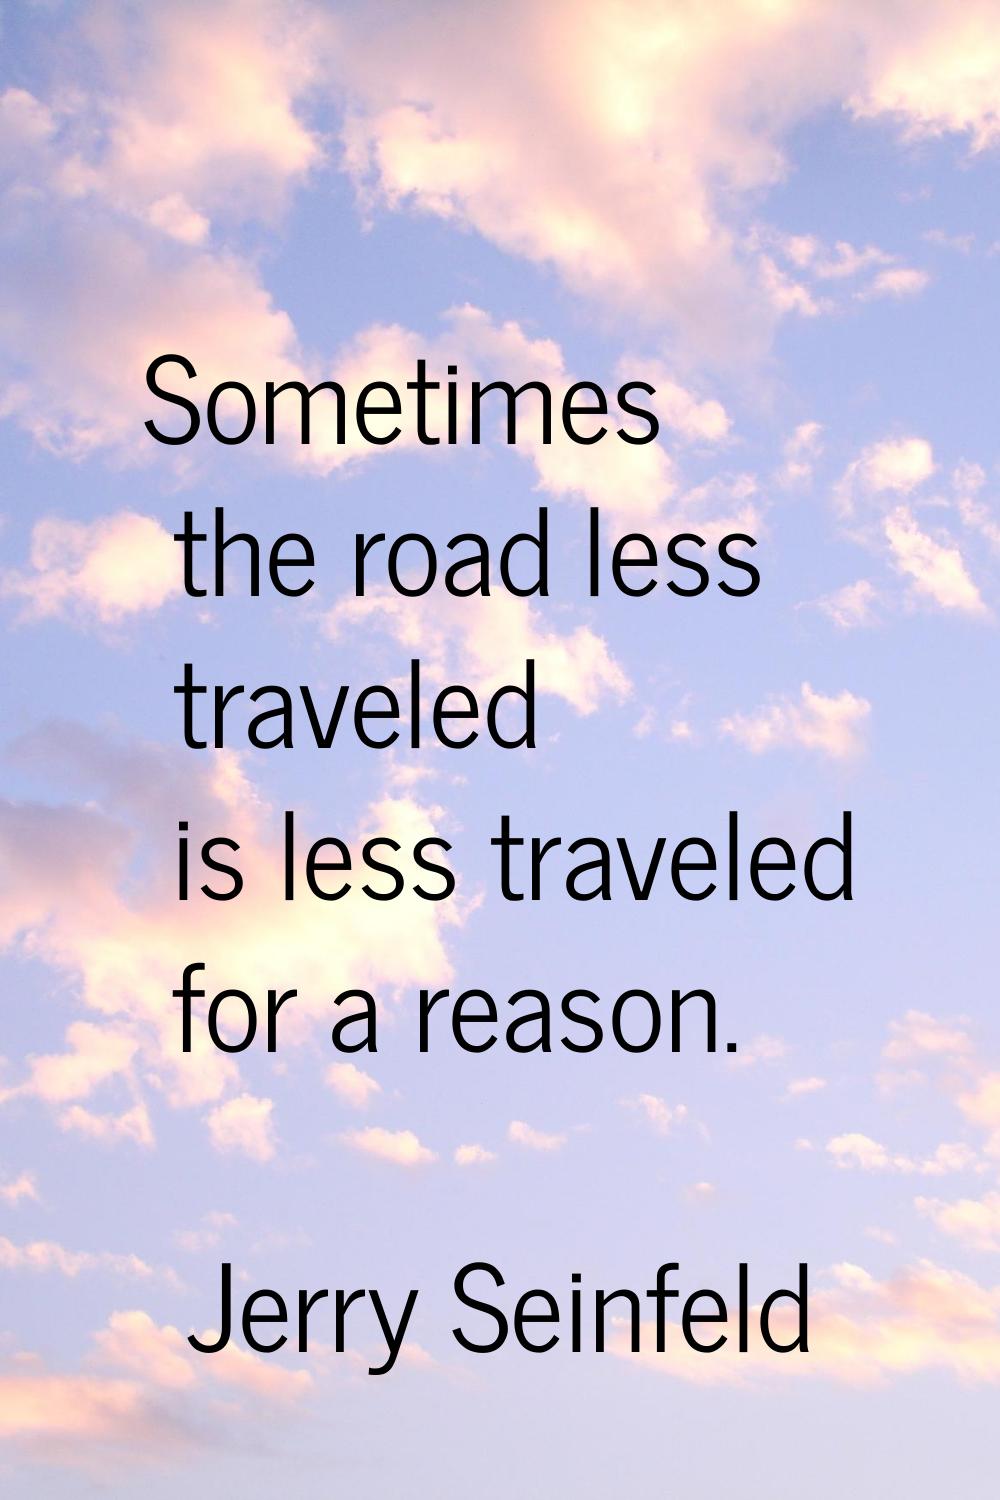 Sometimes the road less traveled is less traveled for a reason.